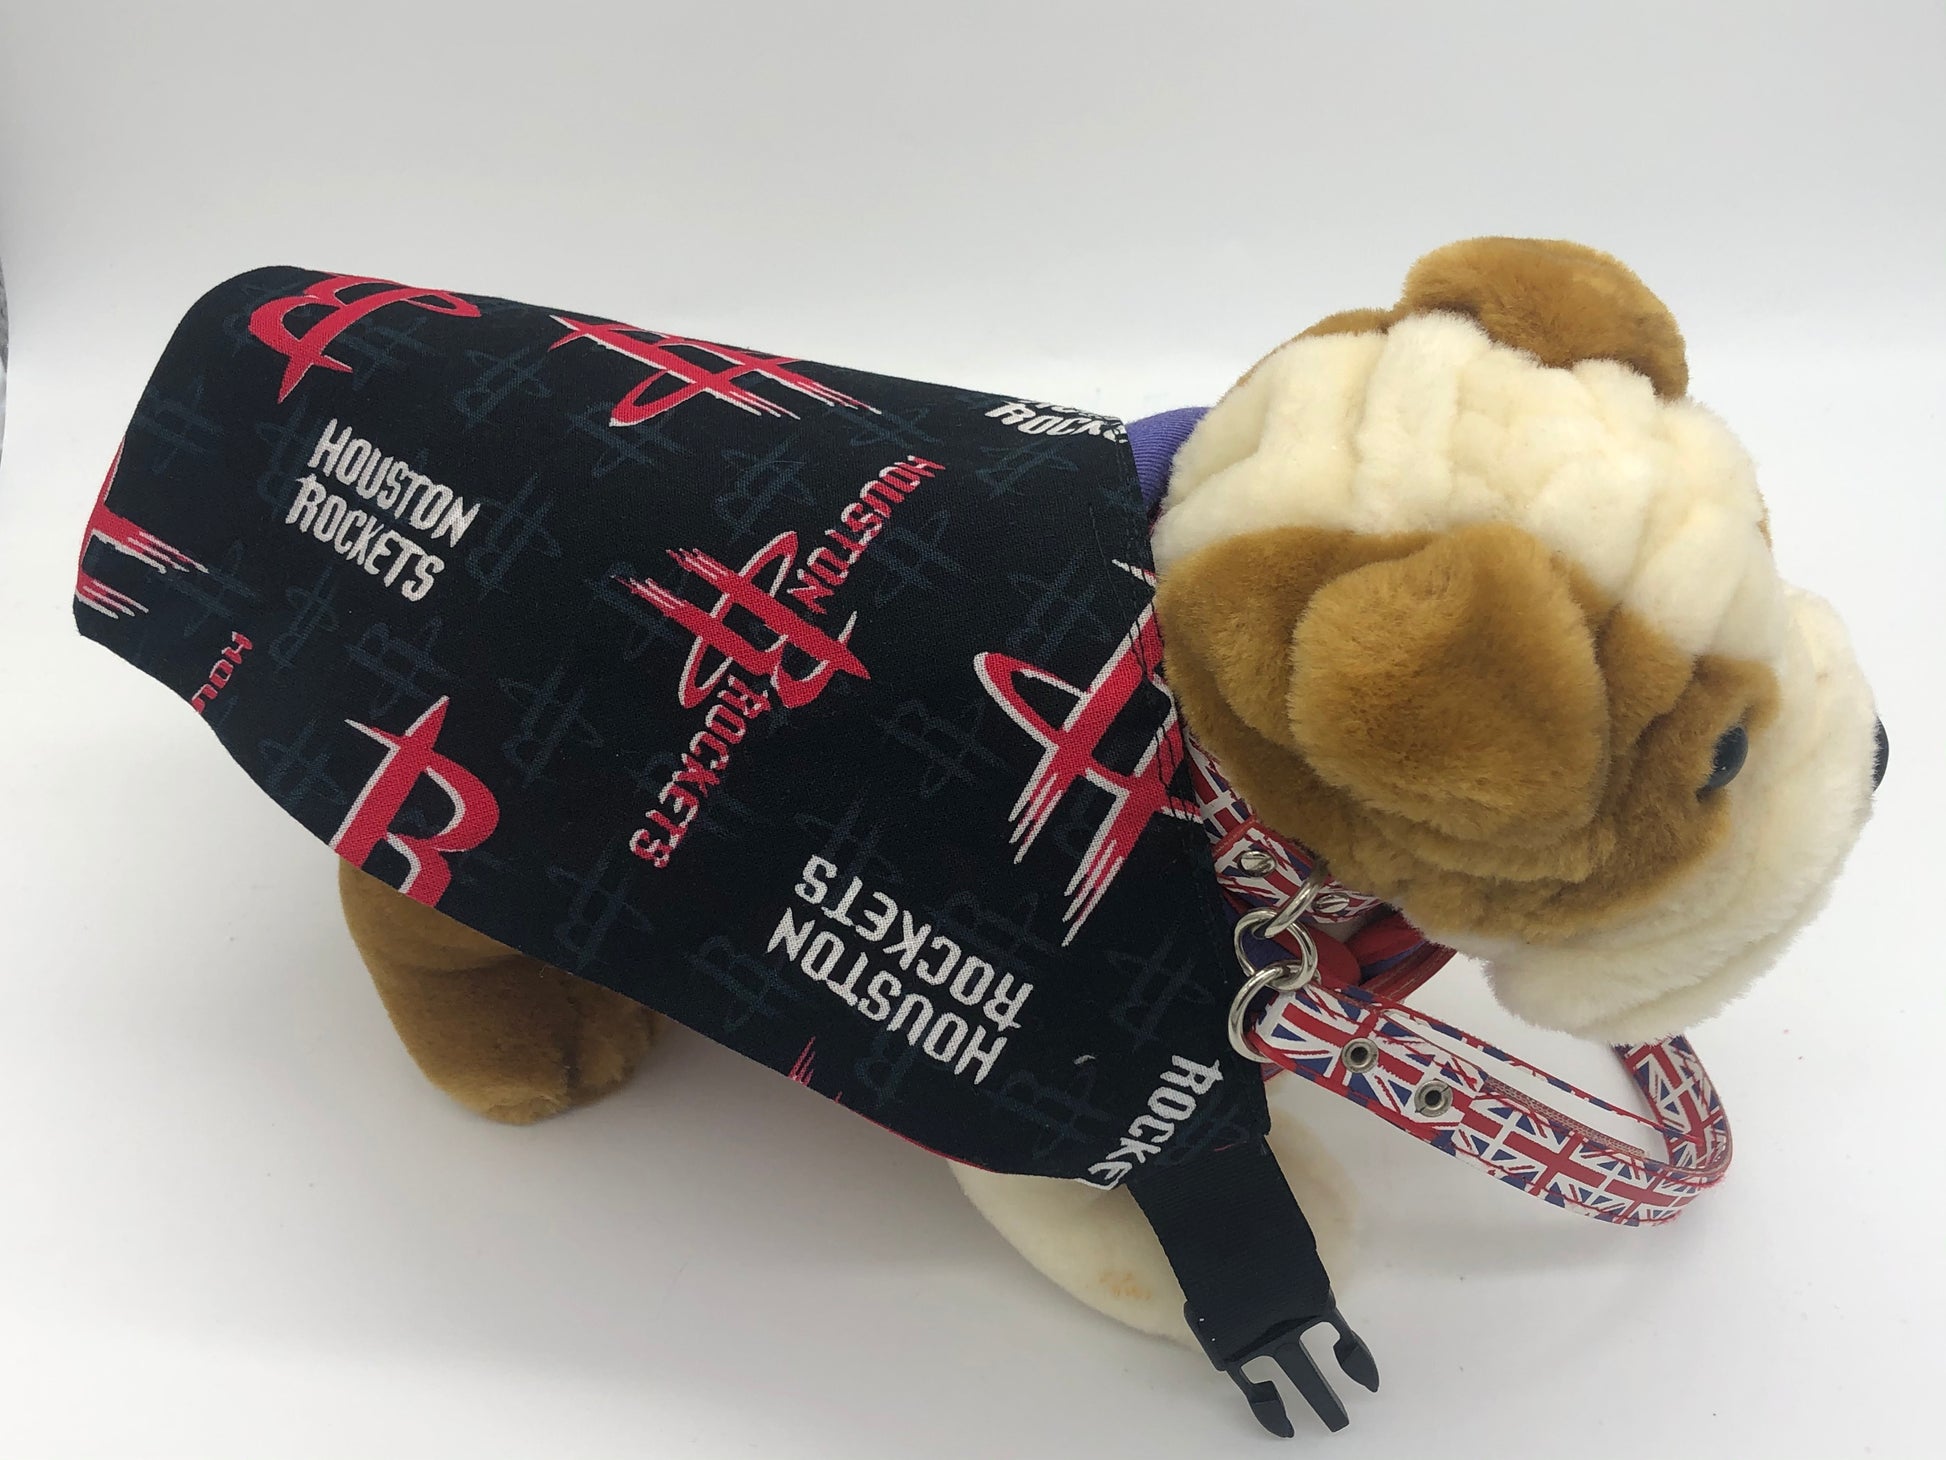 Photo of a small stuffed brown and cream dog with a black and red triangular bandana with the Houston Rockets logo in red and white across it's back.